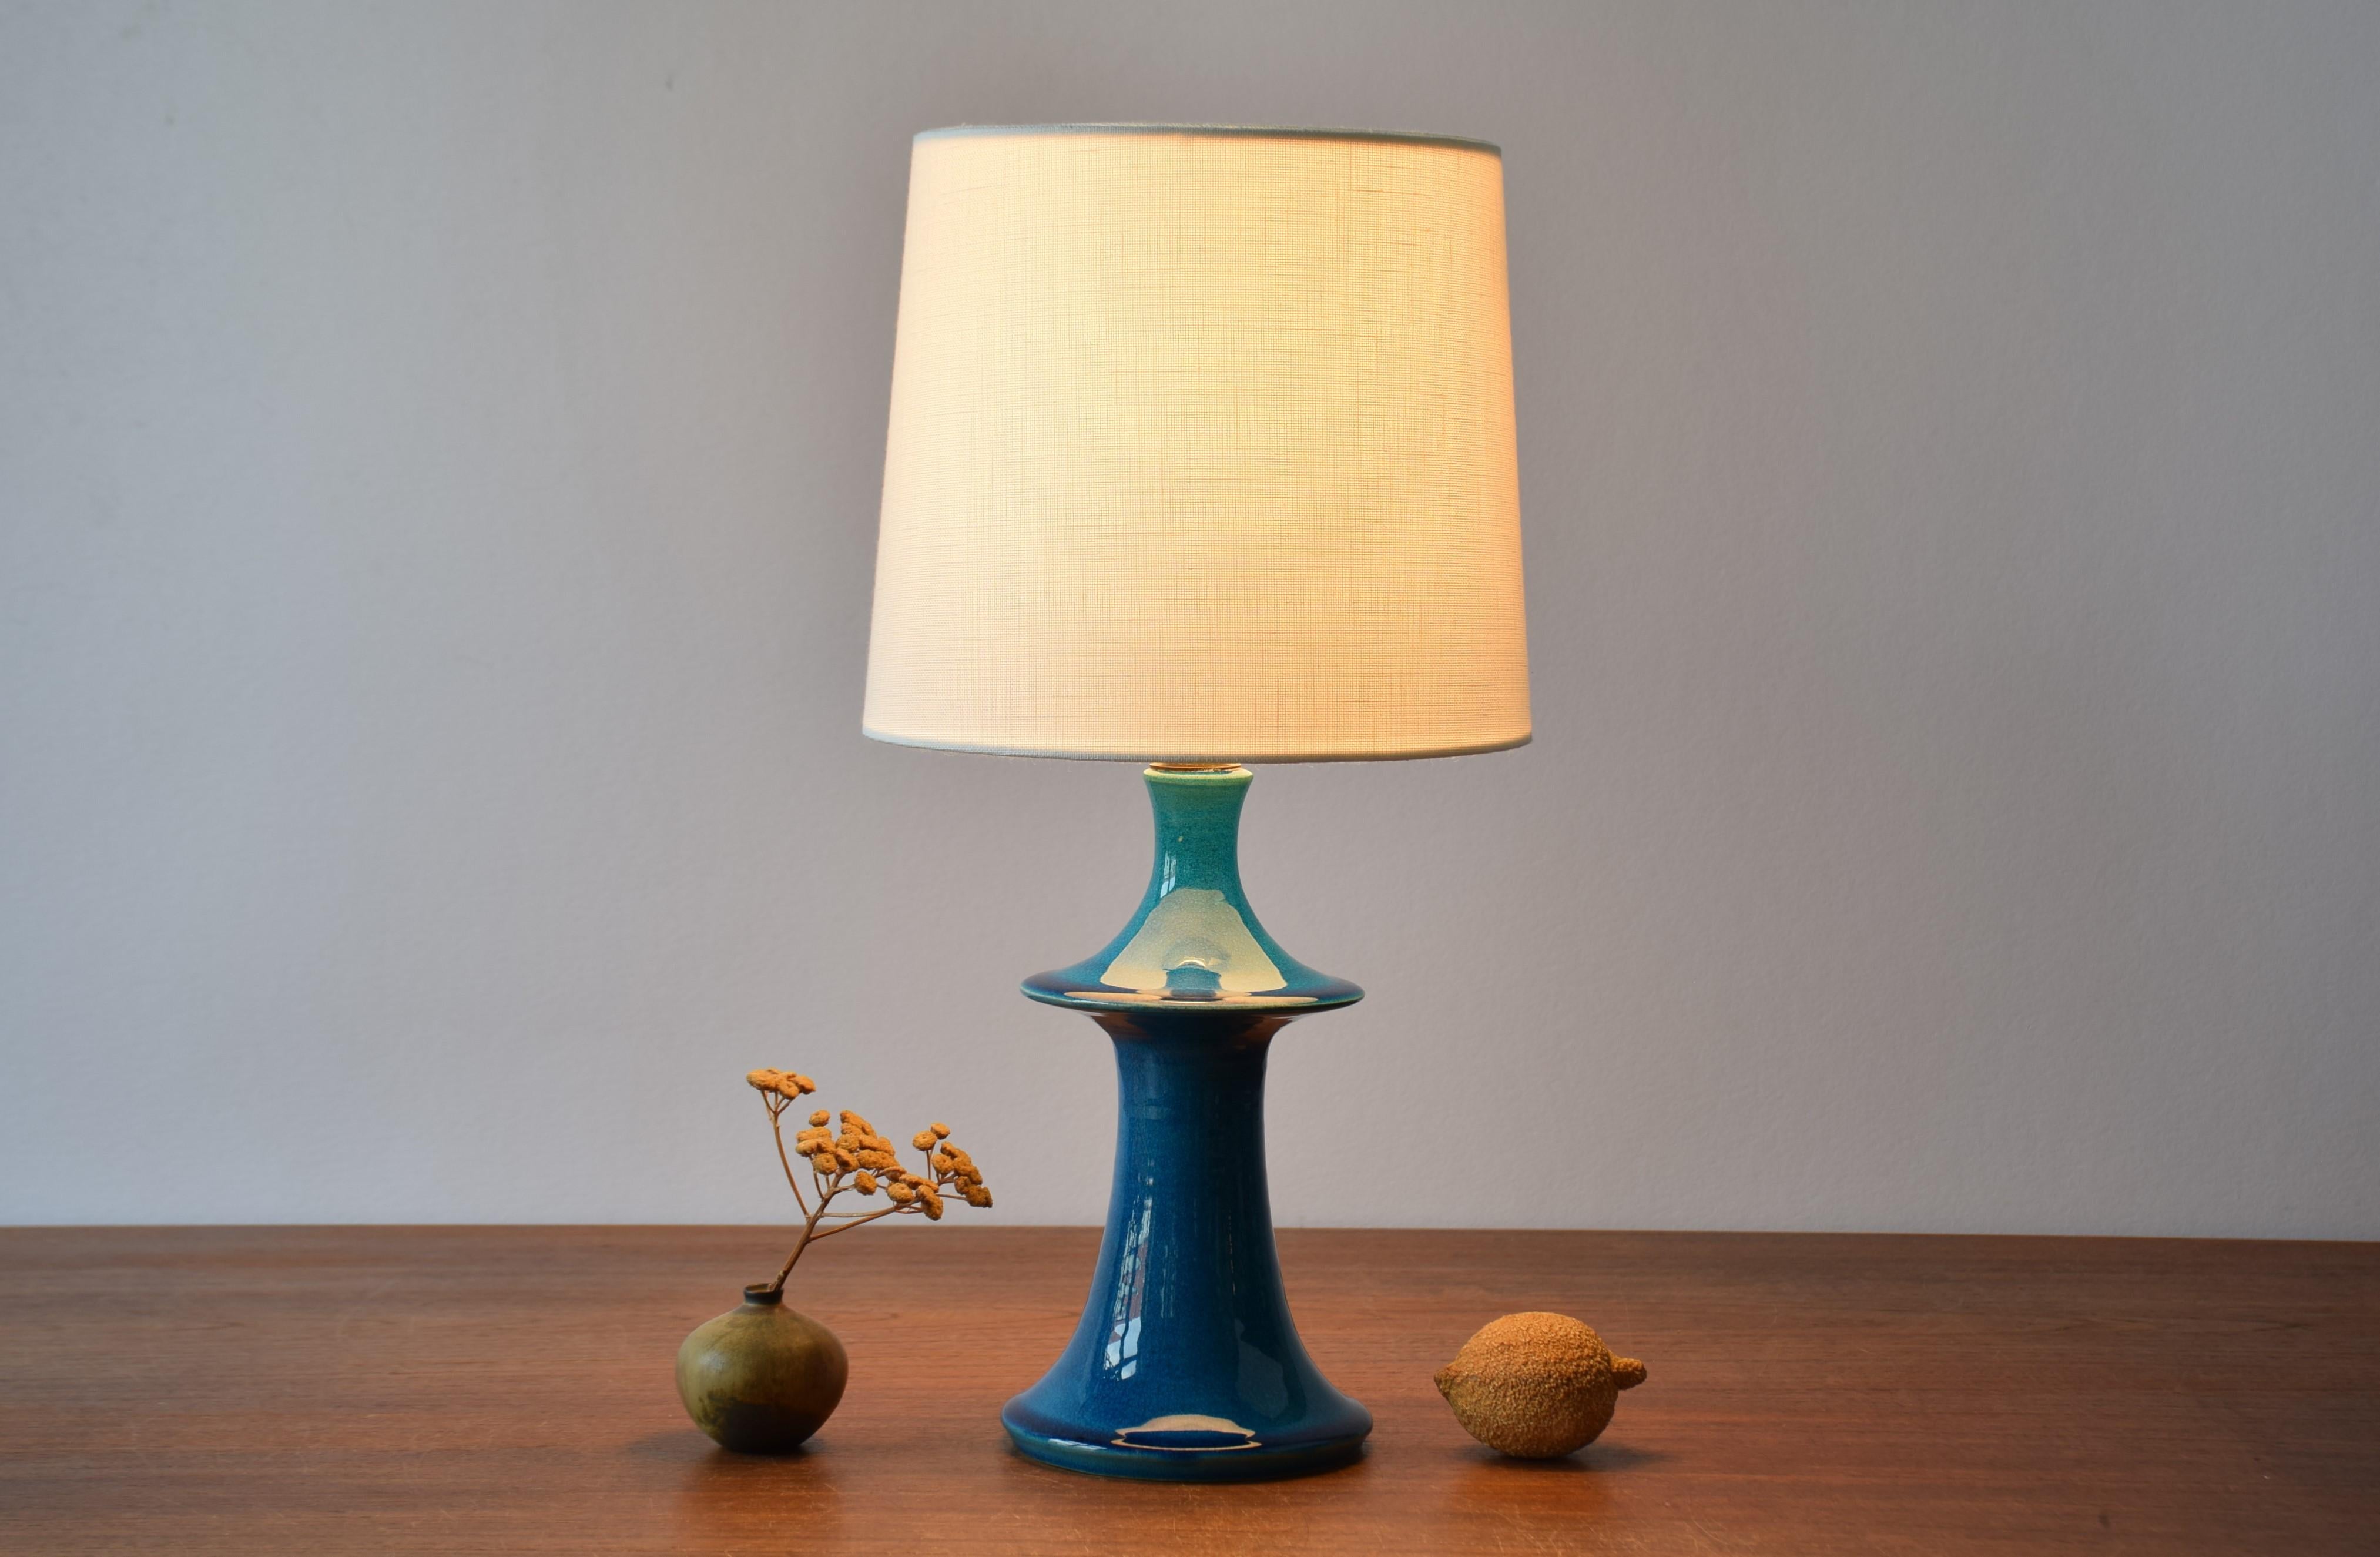 Small mid-century Danish table lamp from the ceramic workshop Kähler (HAK).
The lamp is made from stoneware and has a shiny turquoise blue glaze.
The design is most likely by Poul Erik Eliasen. Made circa 1960s.

On bottom the lamp base is